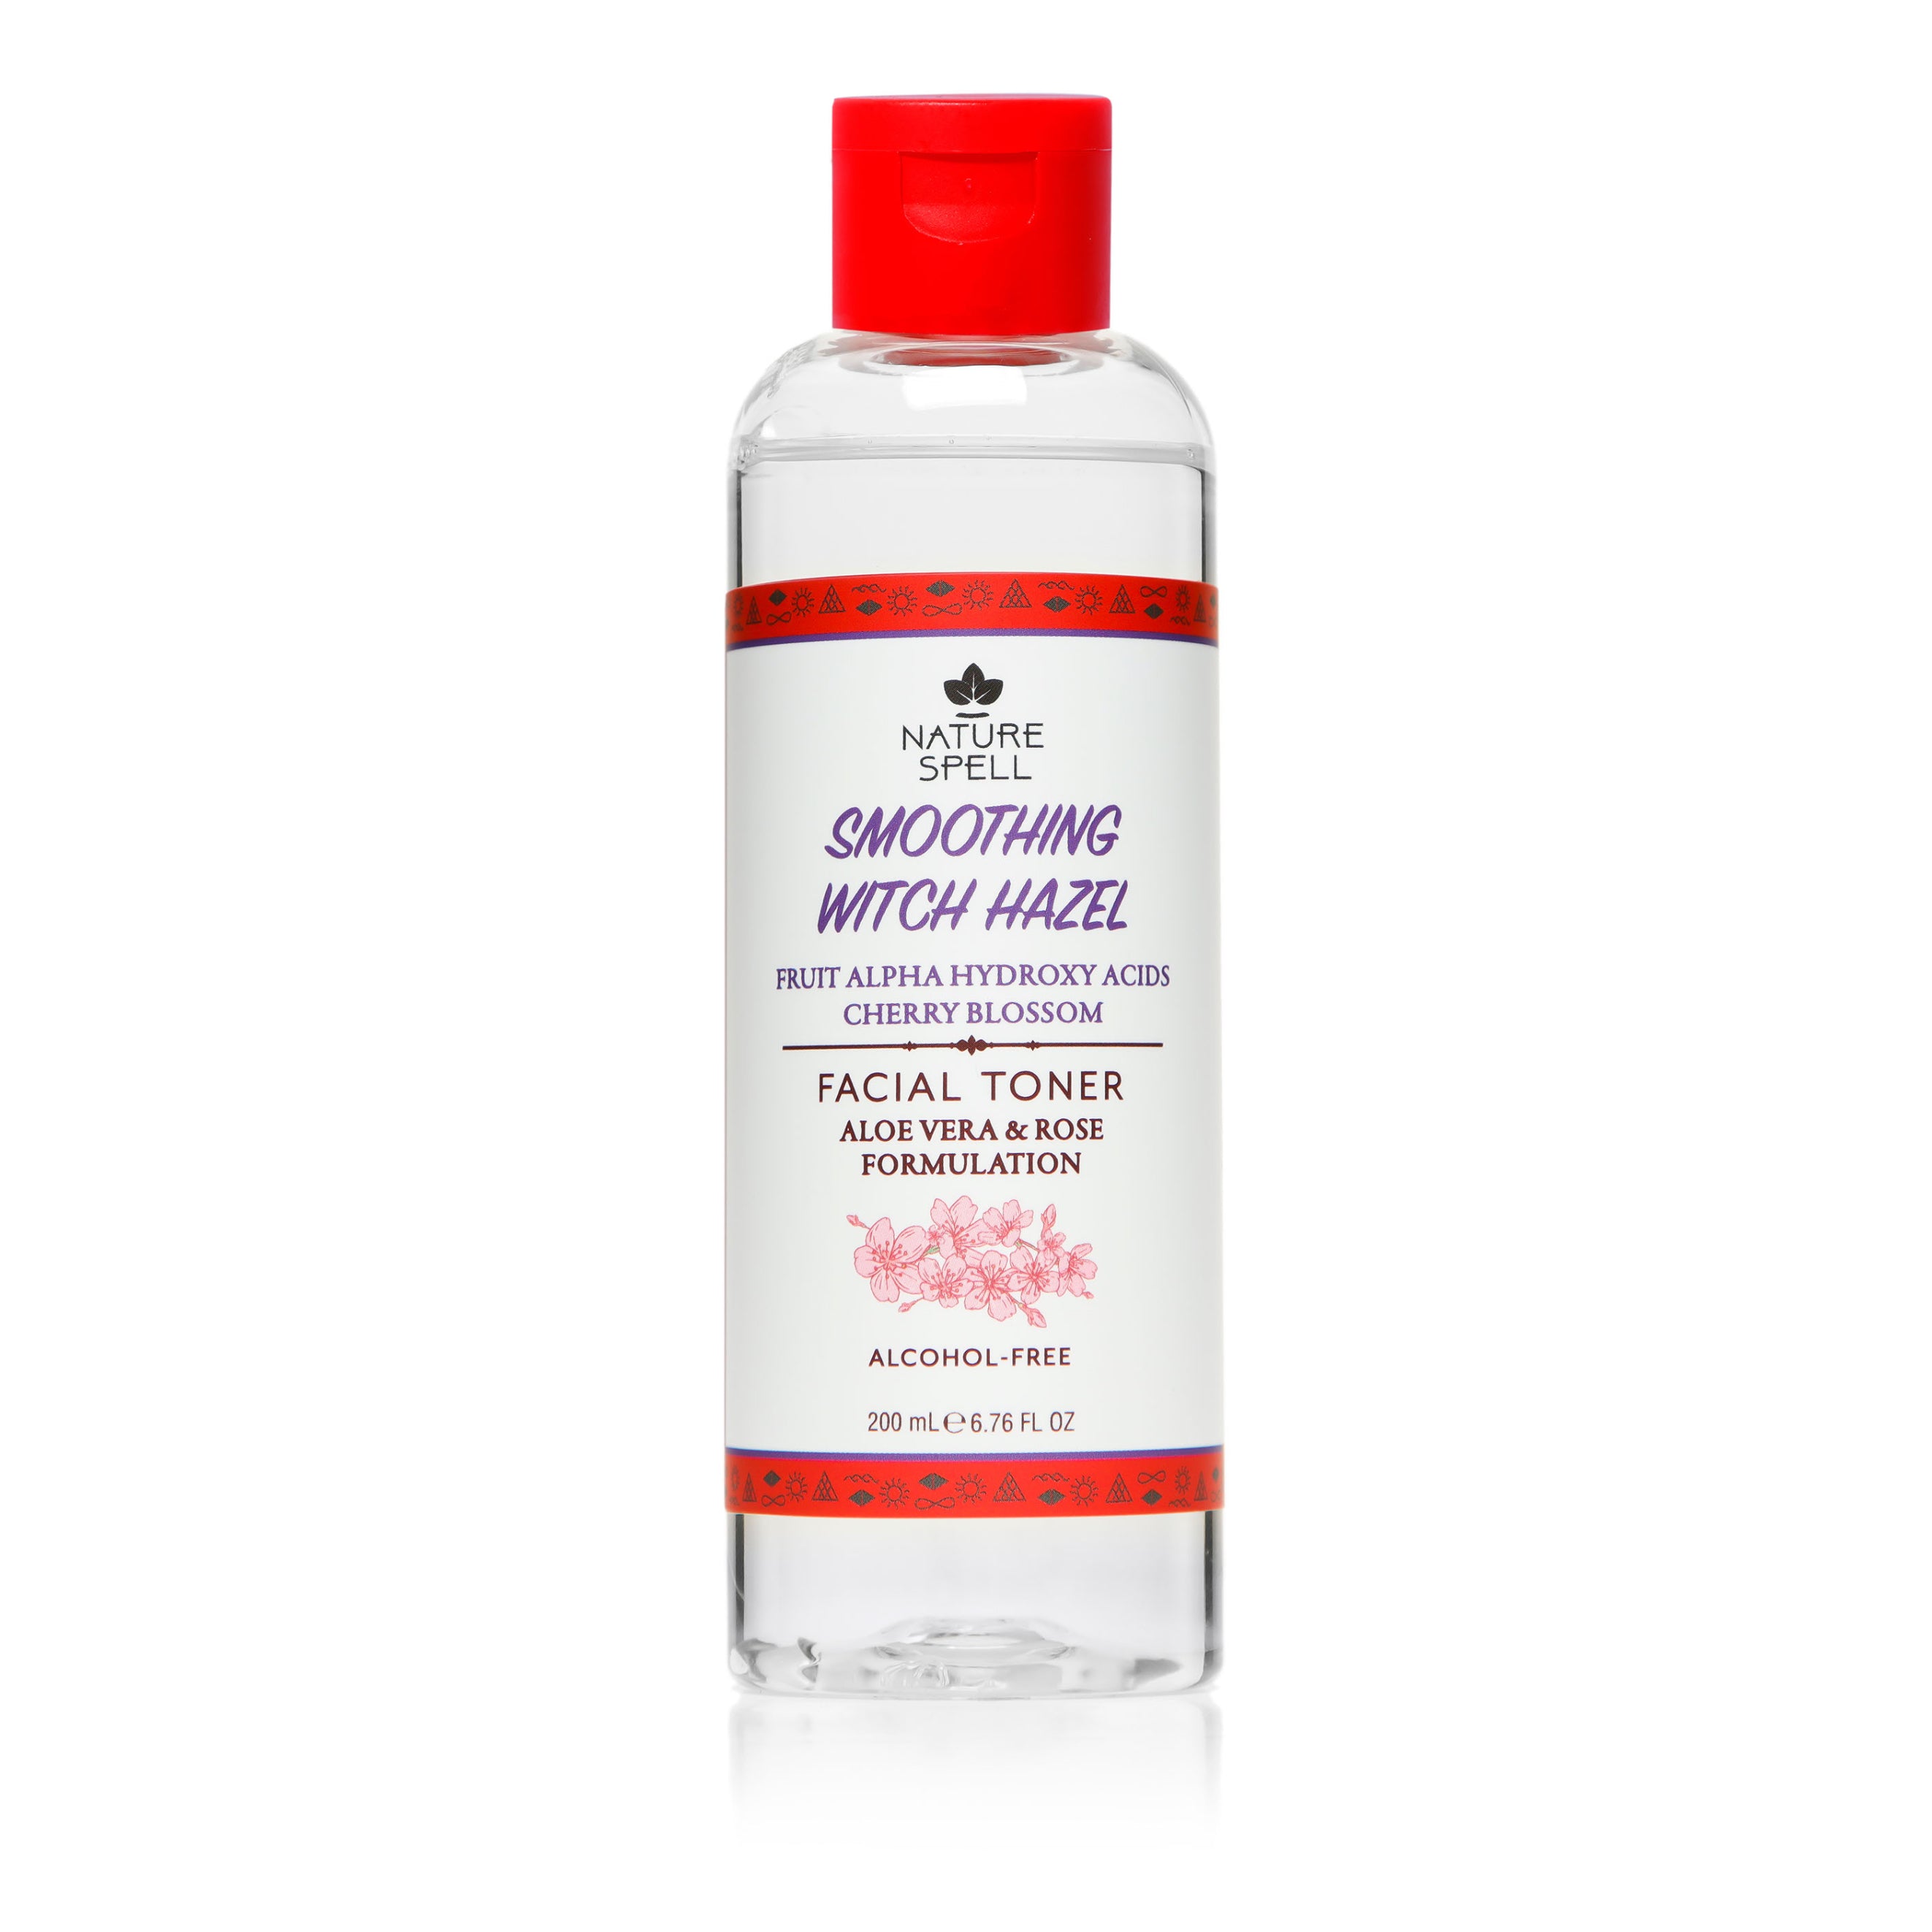 Smoothing Witch Hazel Face Toner with AHA's